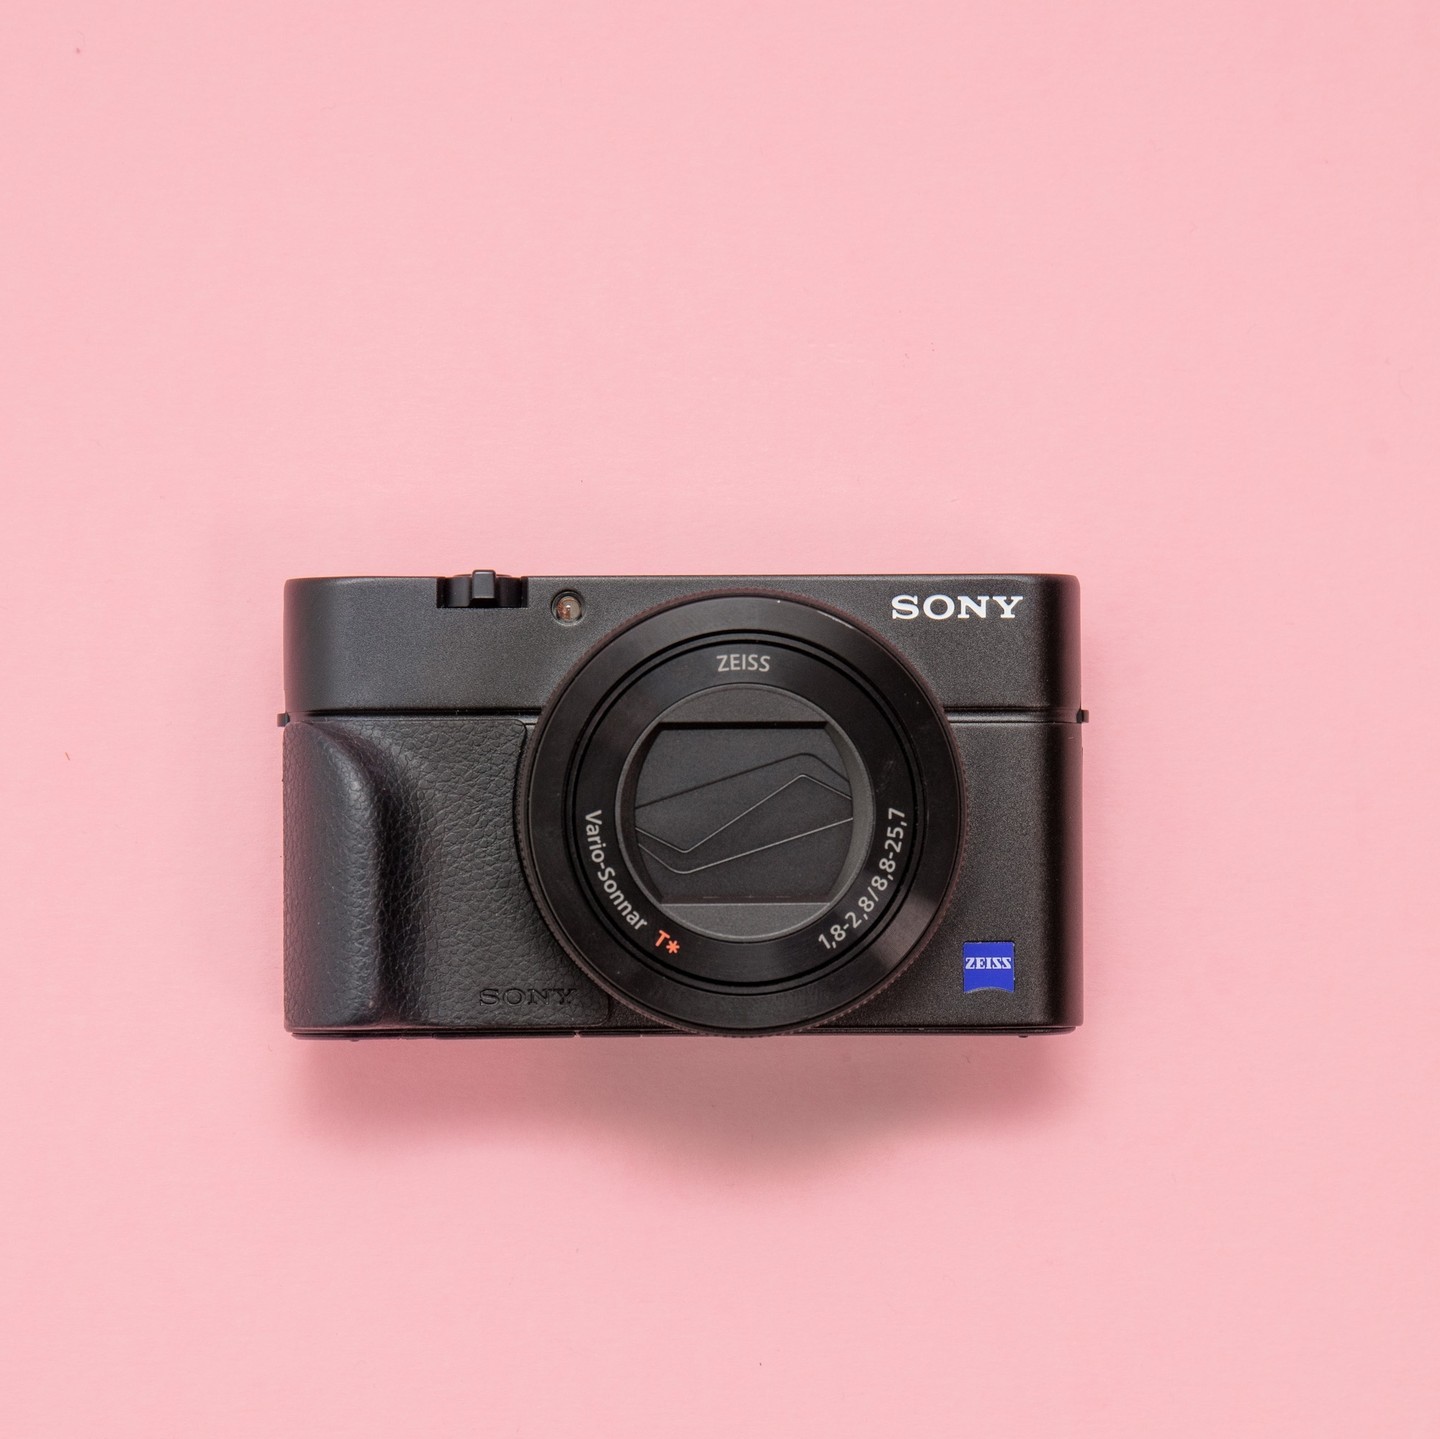 MPB on Twitter: "The #Sony RX100 IV is a great option for an affordable  enthusiasts compact camera.⁠ ⁠ We like its versatile 24-70mm equivalent  F1.8-2.8 lens &amp; pop-up electronic viewfinder. ⁠ #PauseConsiderAct